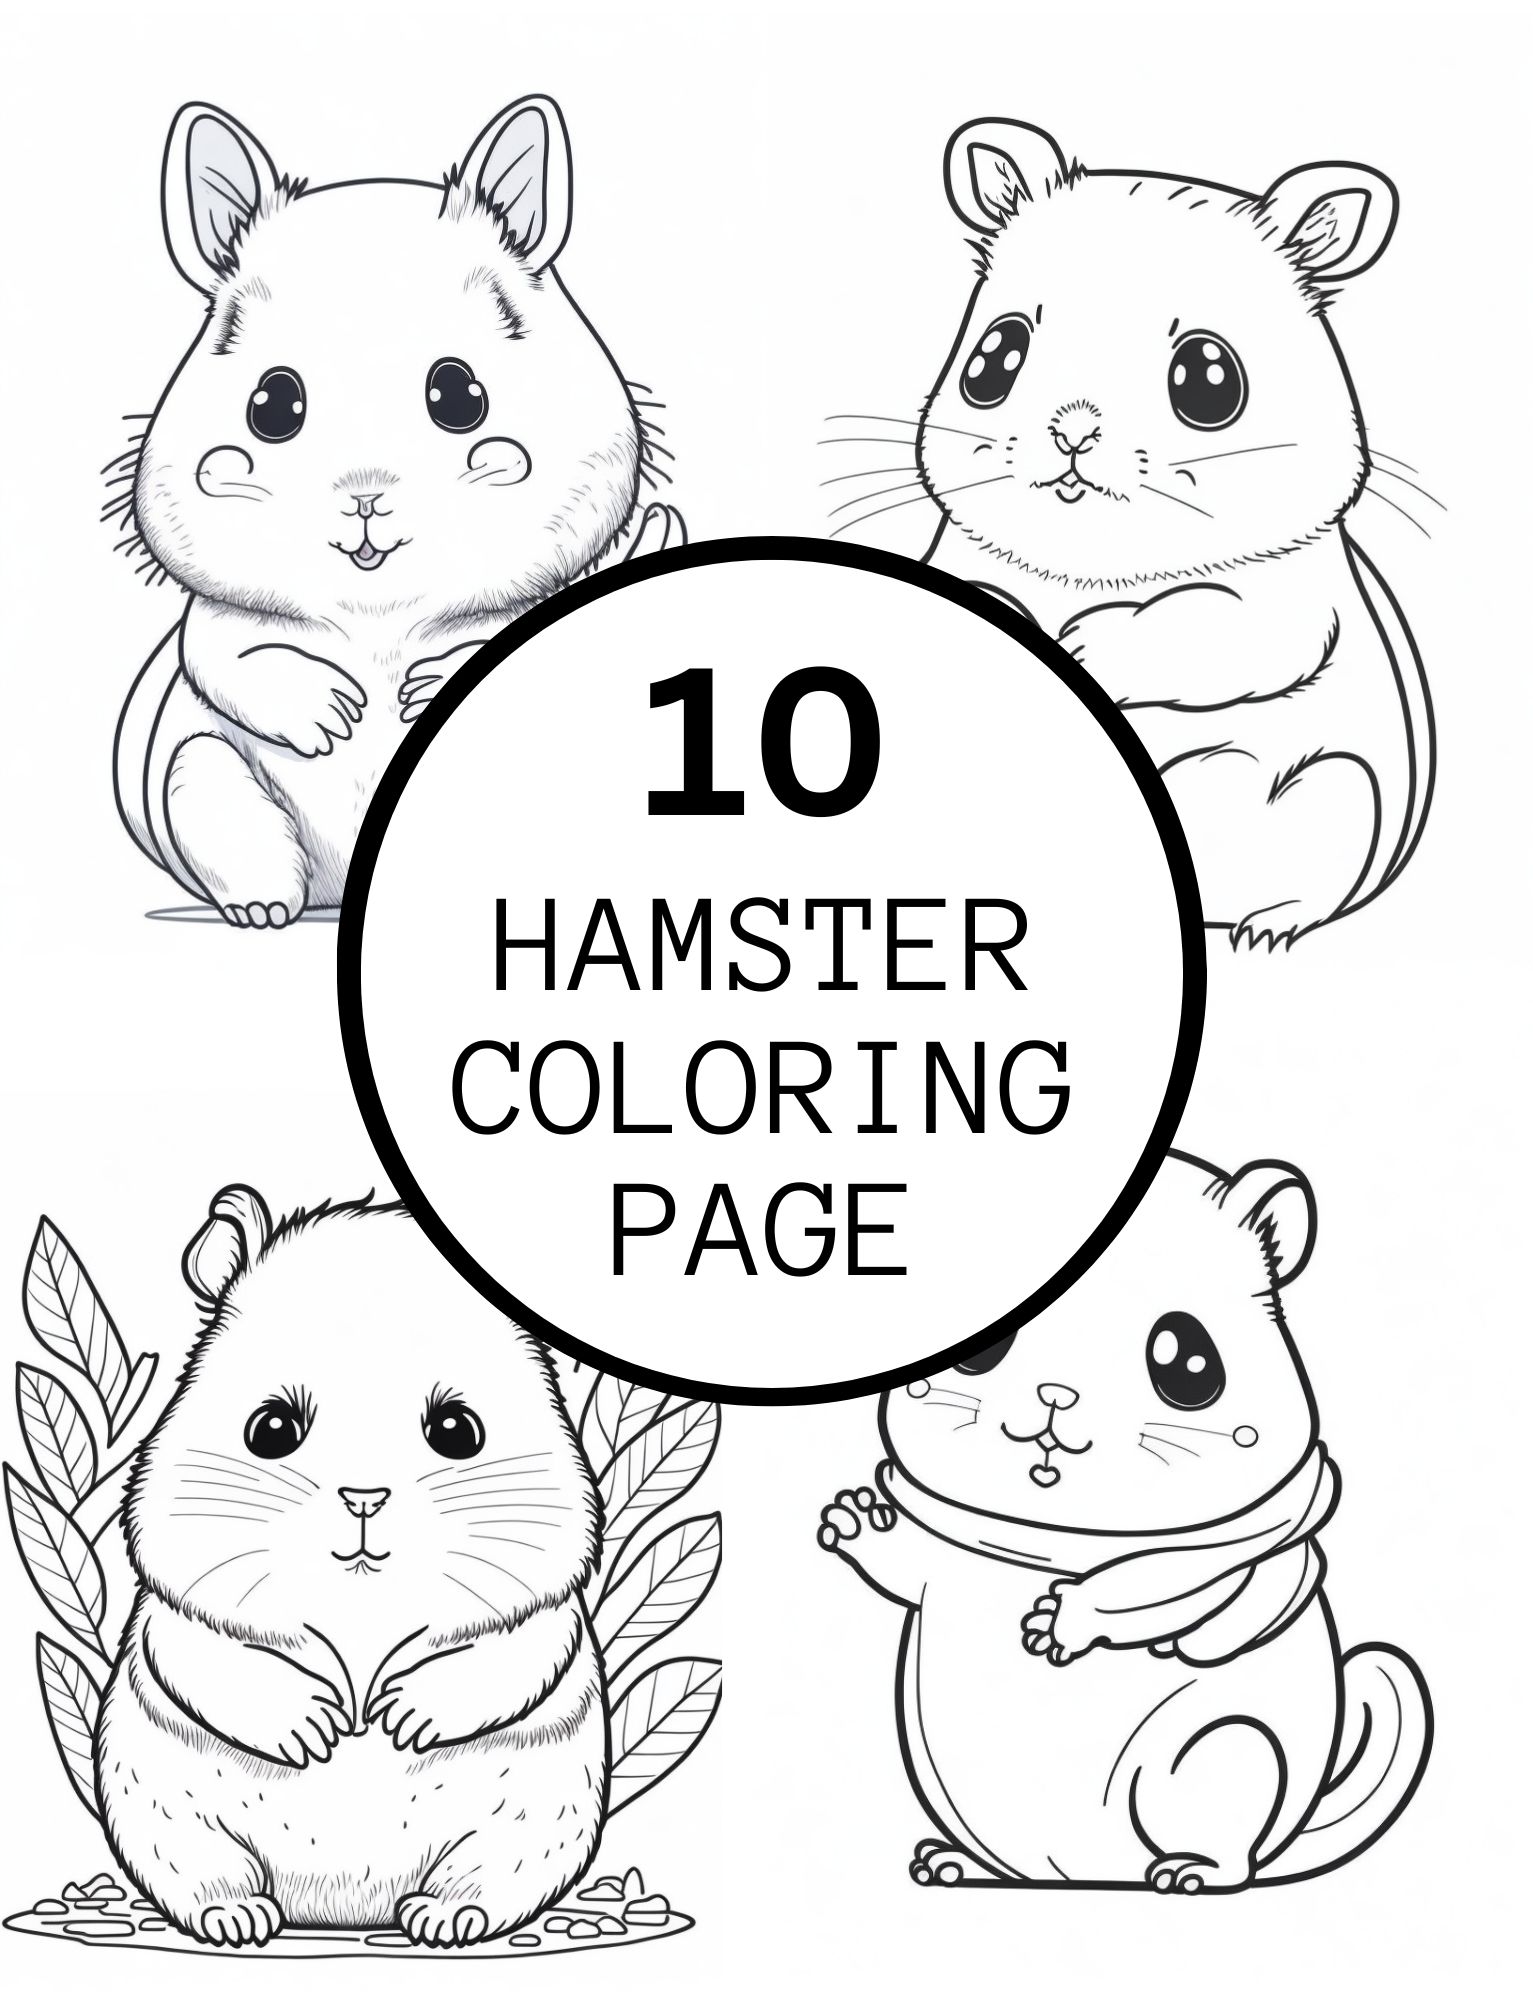 Realistic hamster coloring pages for kids and adults made by teachers